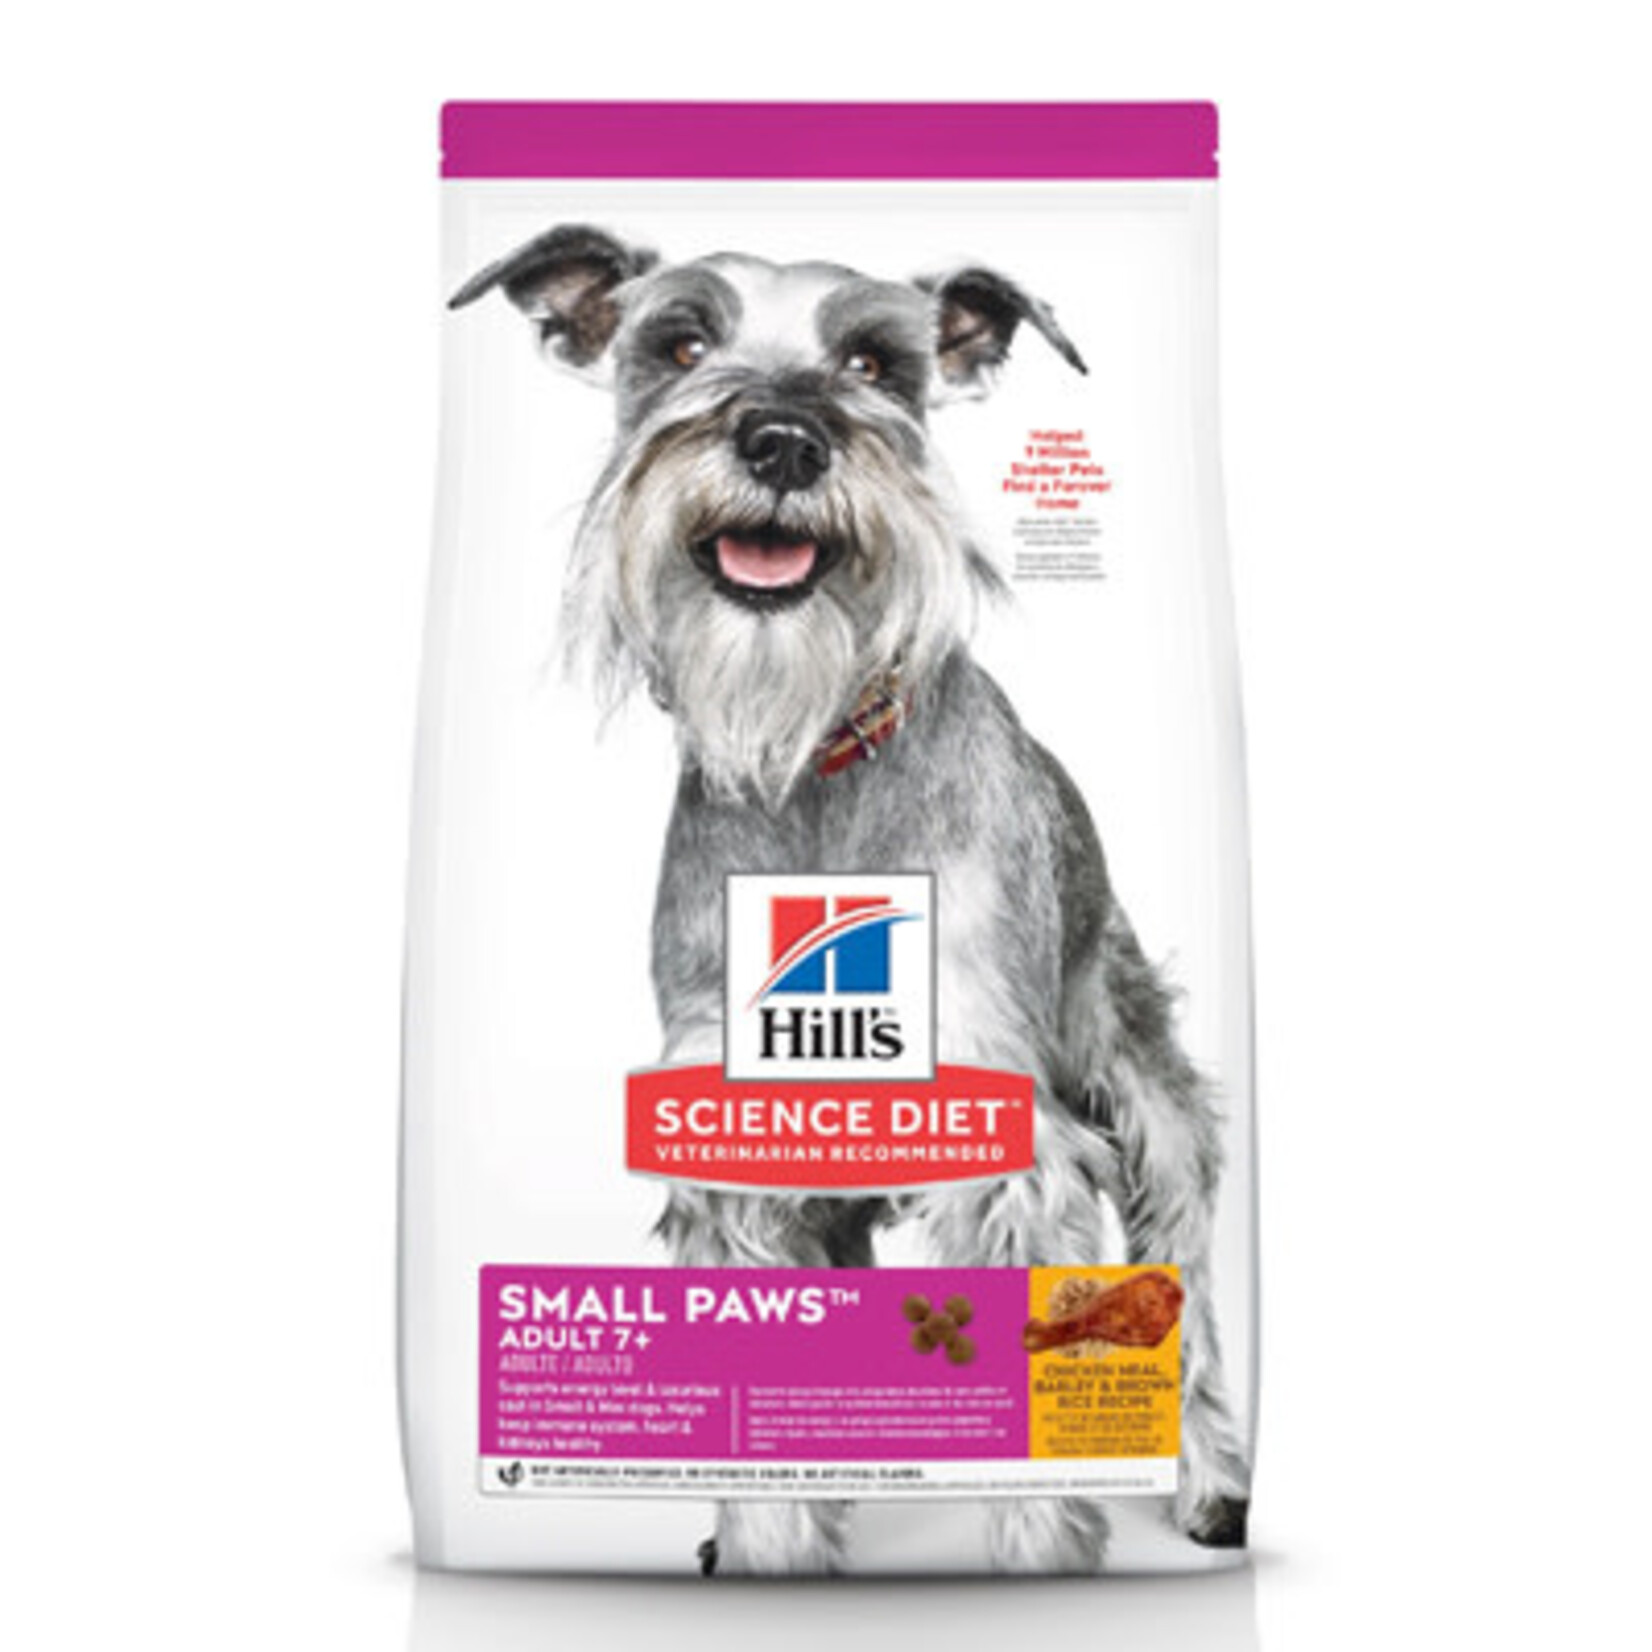 Science Diet Science Diet Adult 7+ Small Paws Chicken & Barley Dog Food 4.5lbs